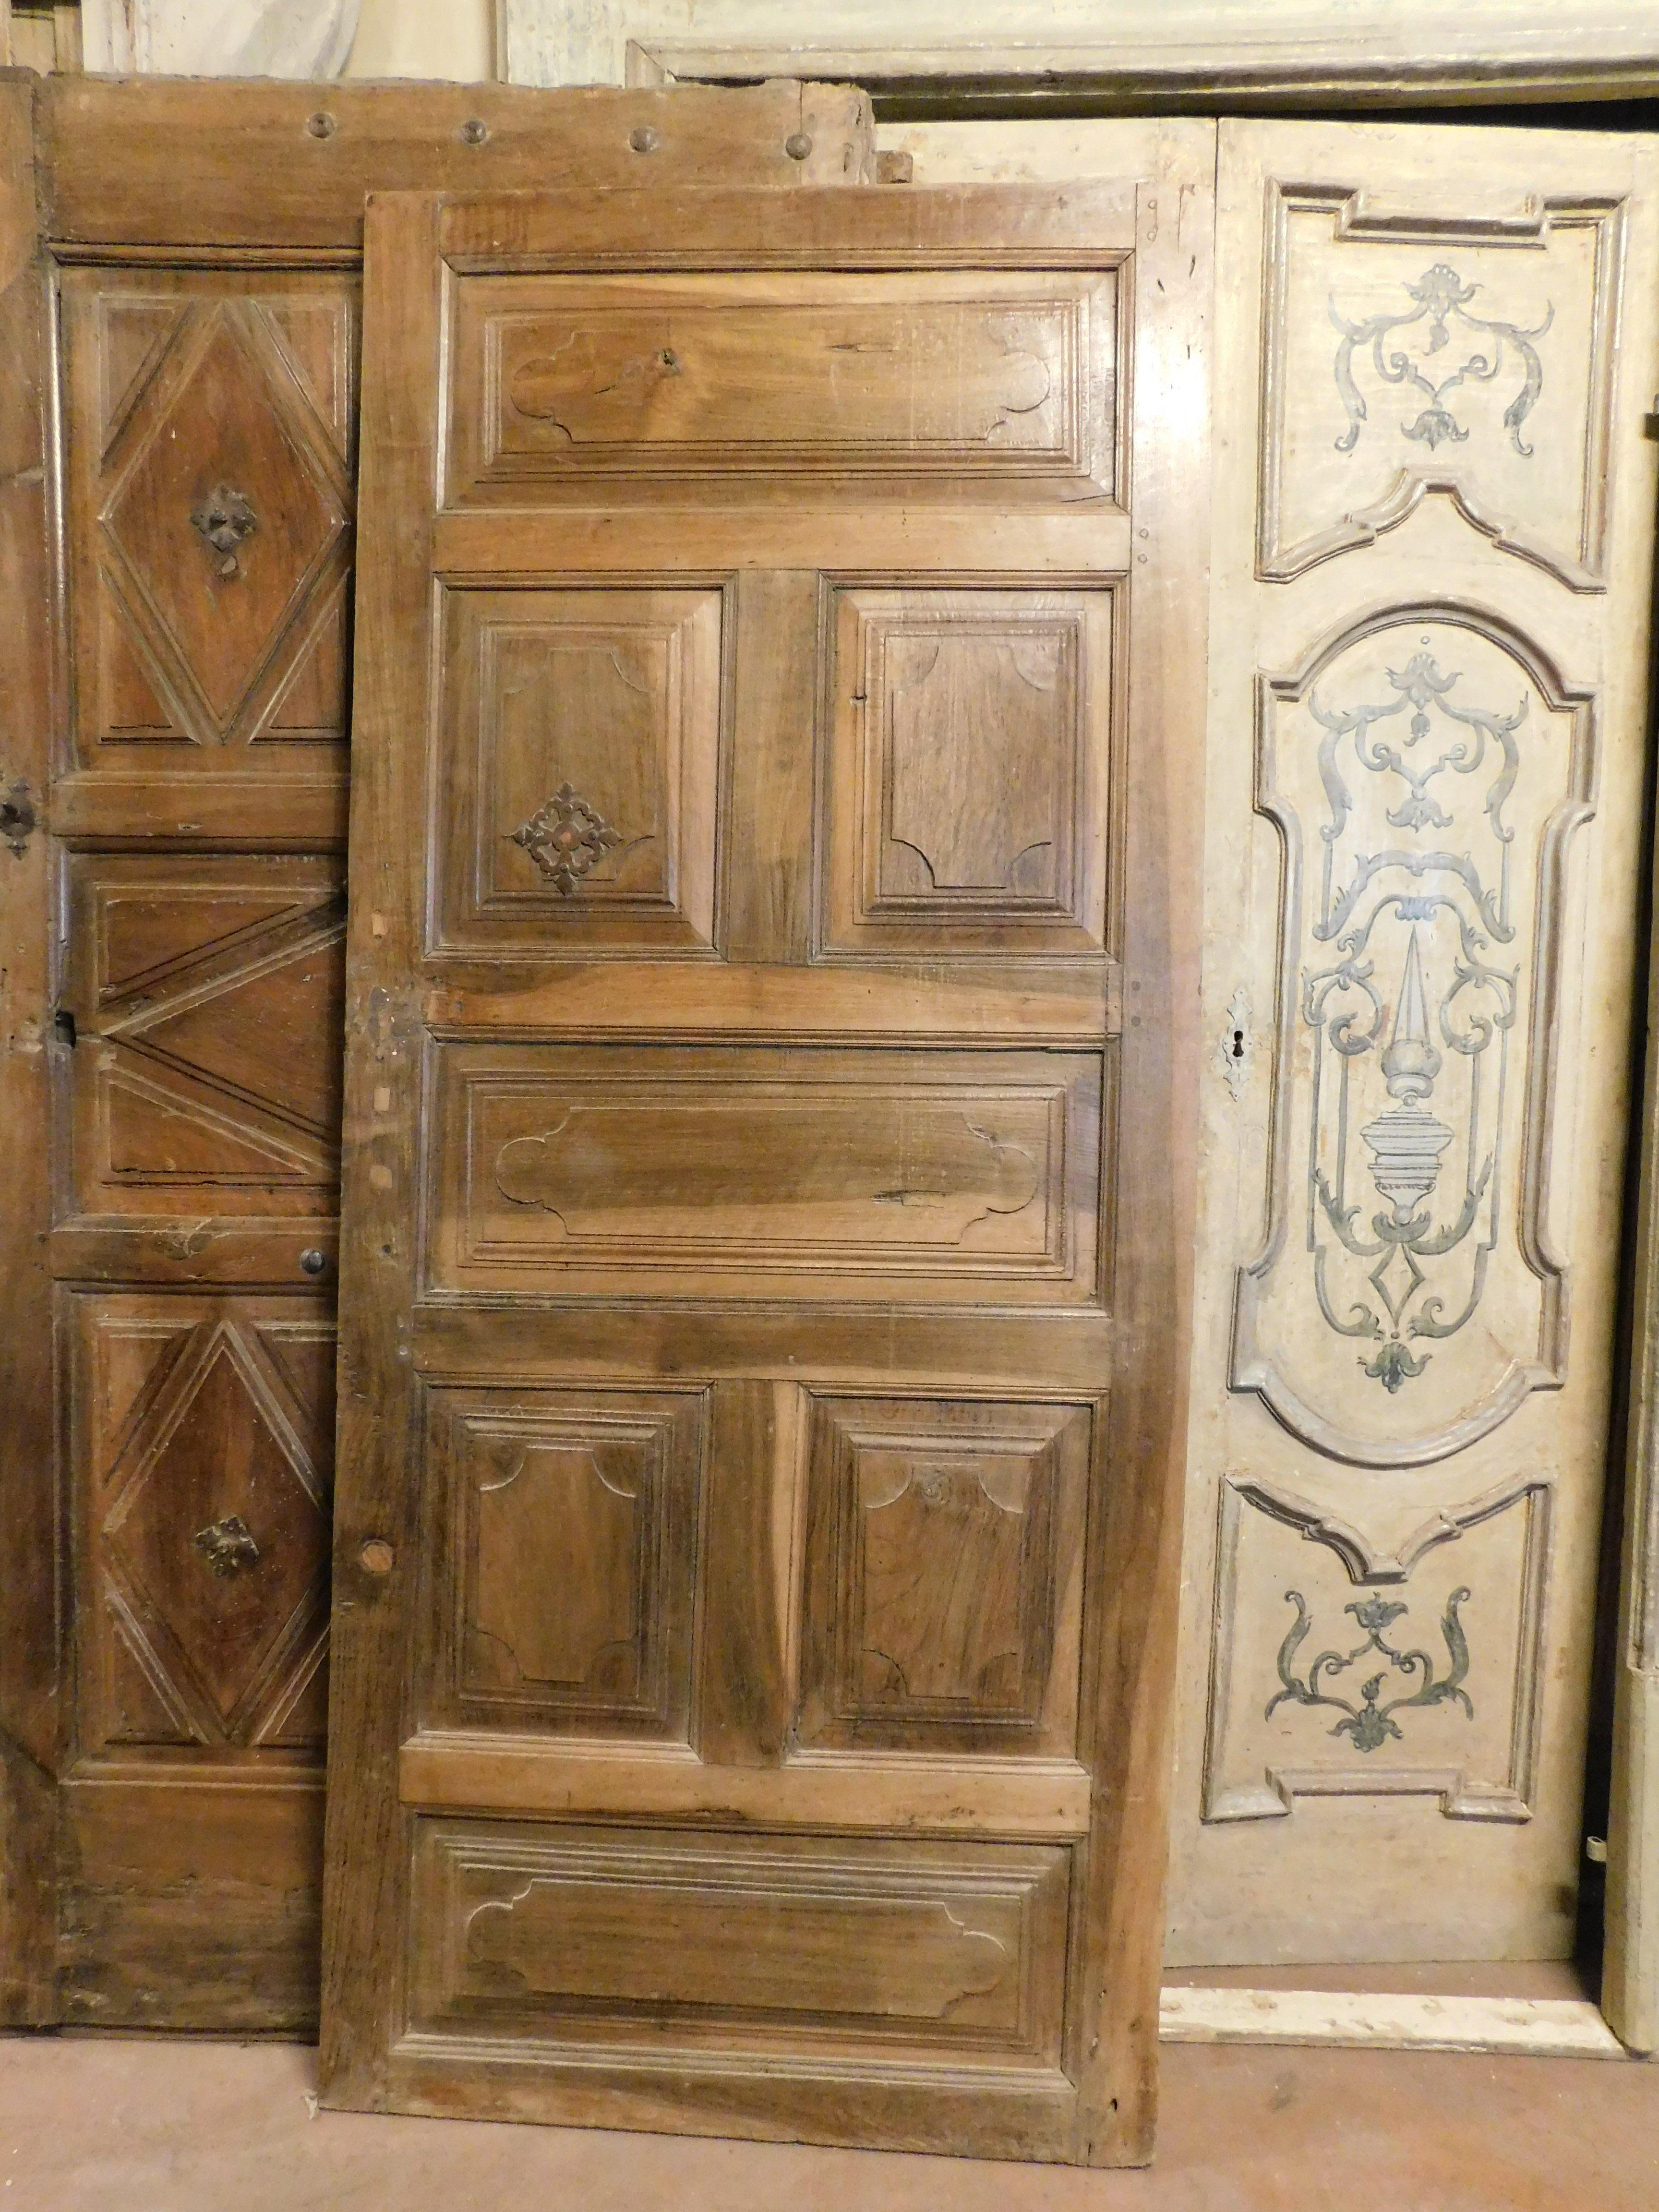 Ancient single-leaf interior door, built in precious solid walnut wood, richly hand-carved with 7 original panels and ironwork, smooth back, hand-built by an artisan artist from the 18th century in northern Italy, measuring w 87 cm x H 200. Can be